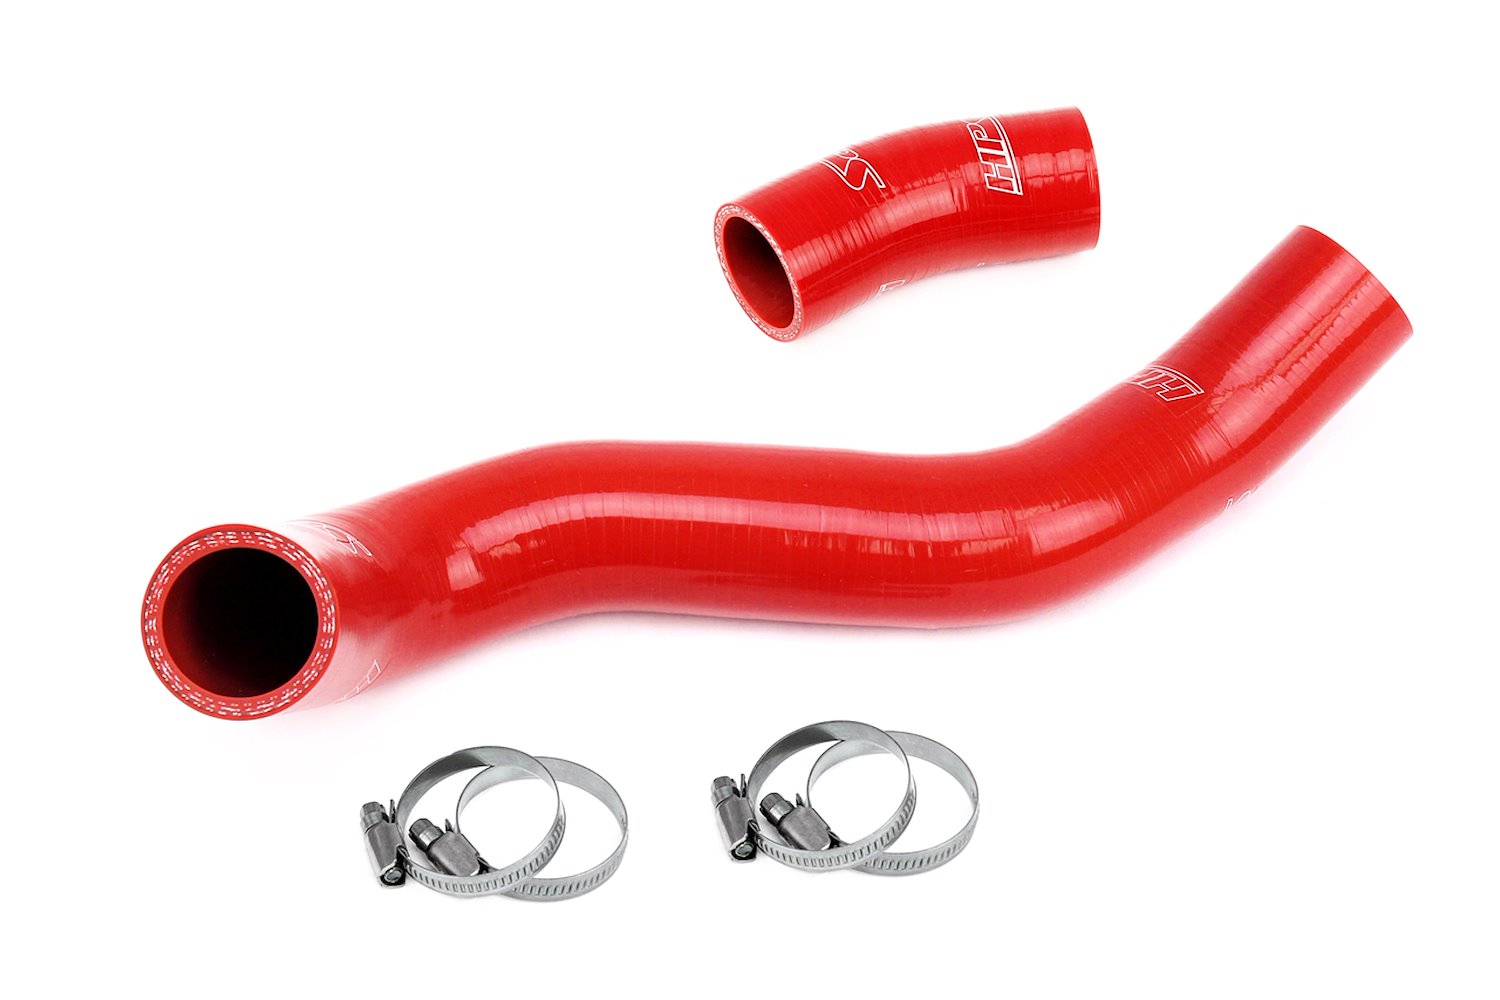 57-2063-RED Radiator Hose Kit, 3-Ply Reinforced Silicone, Replaces Lower Rubber Radiator Hose